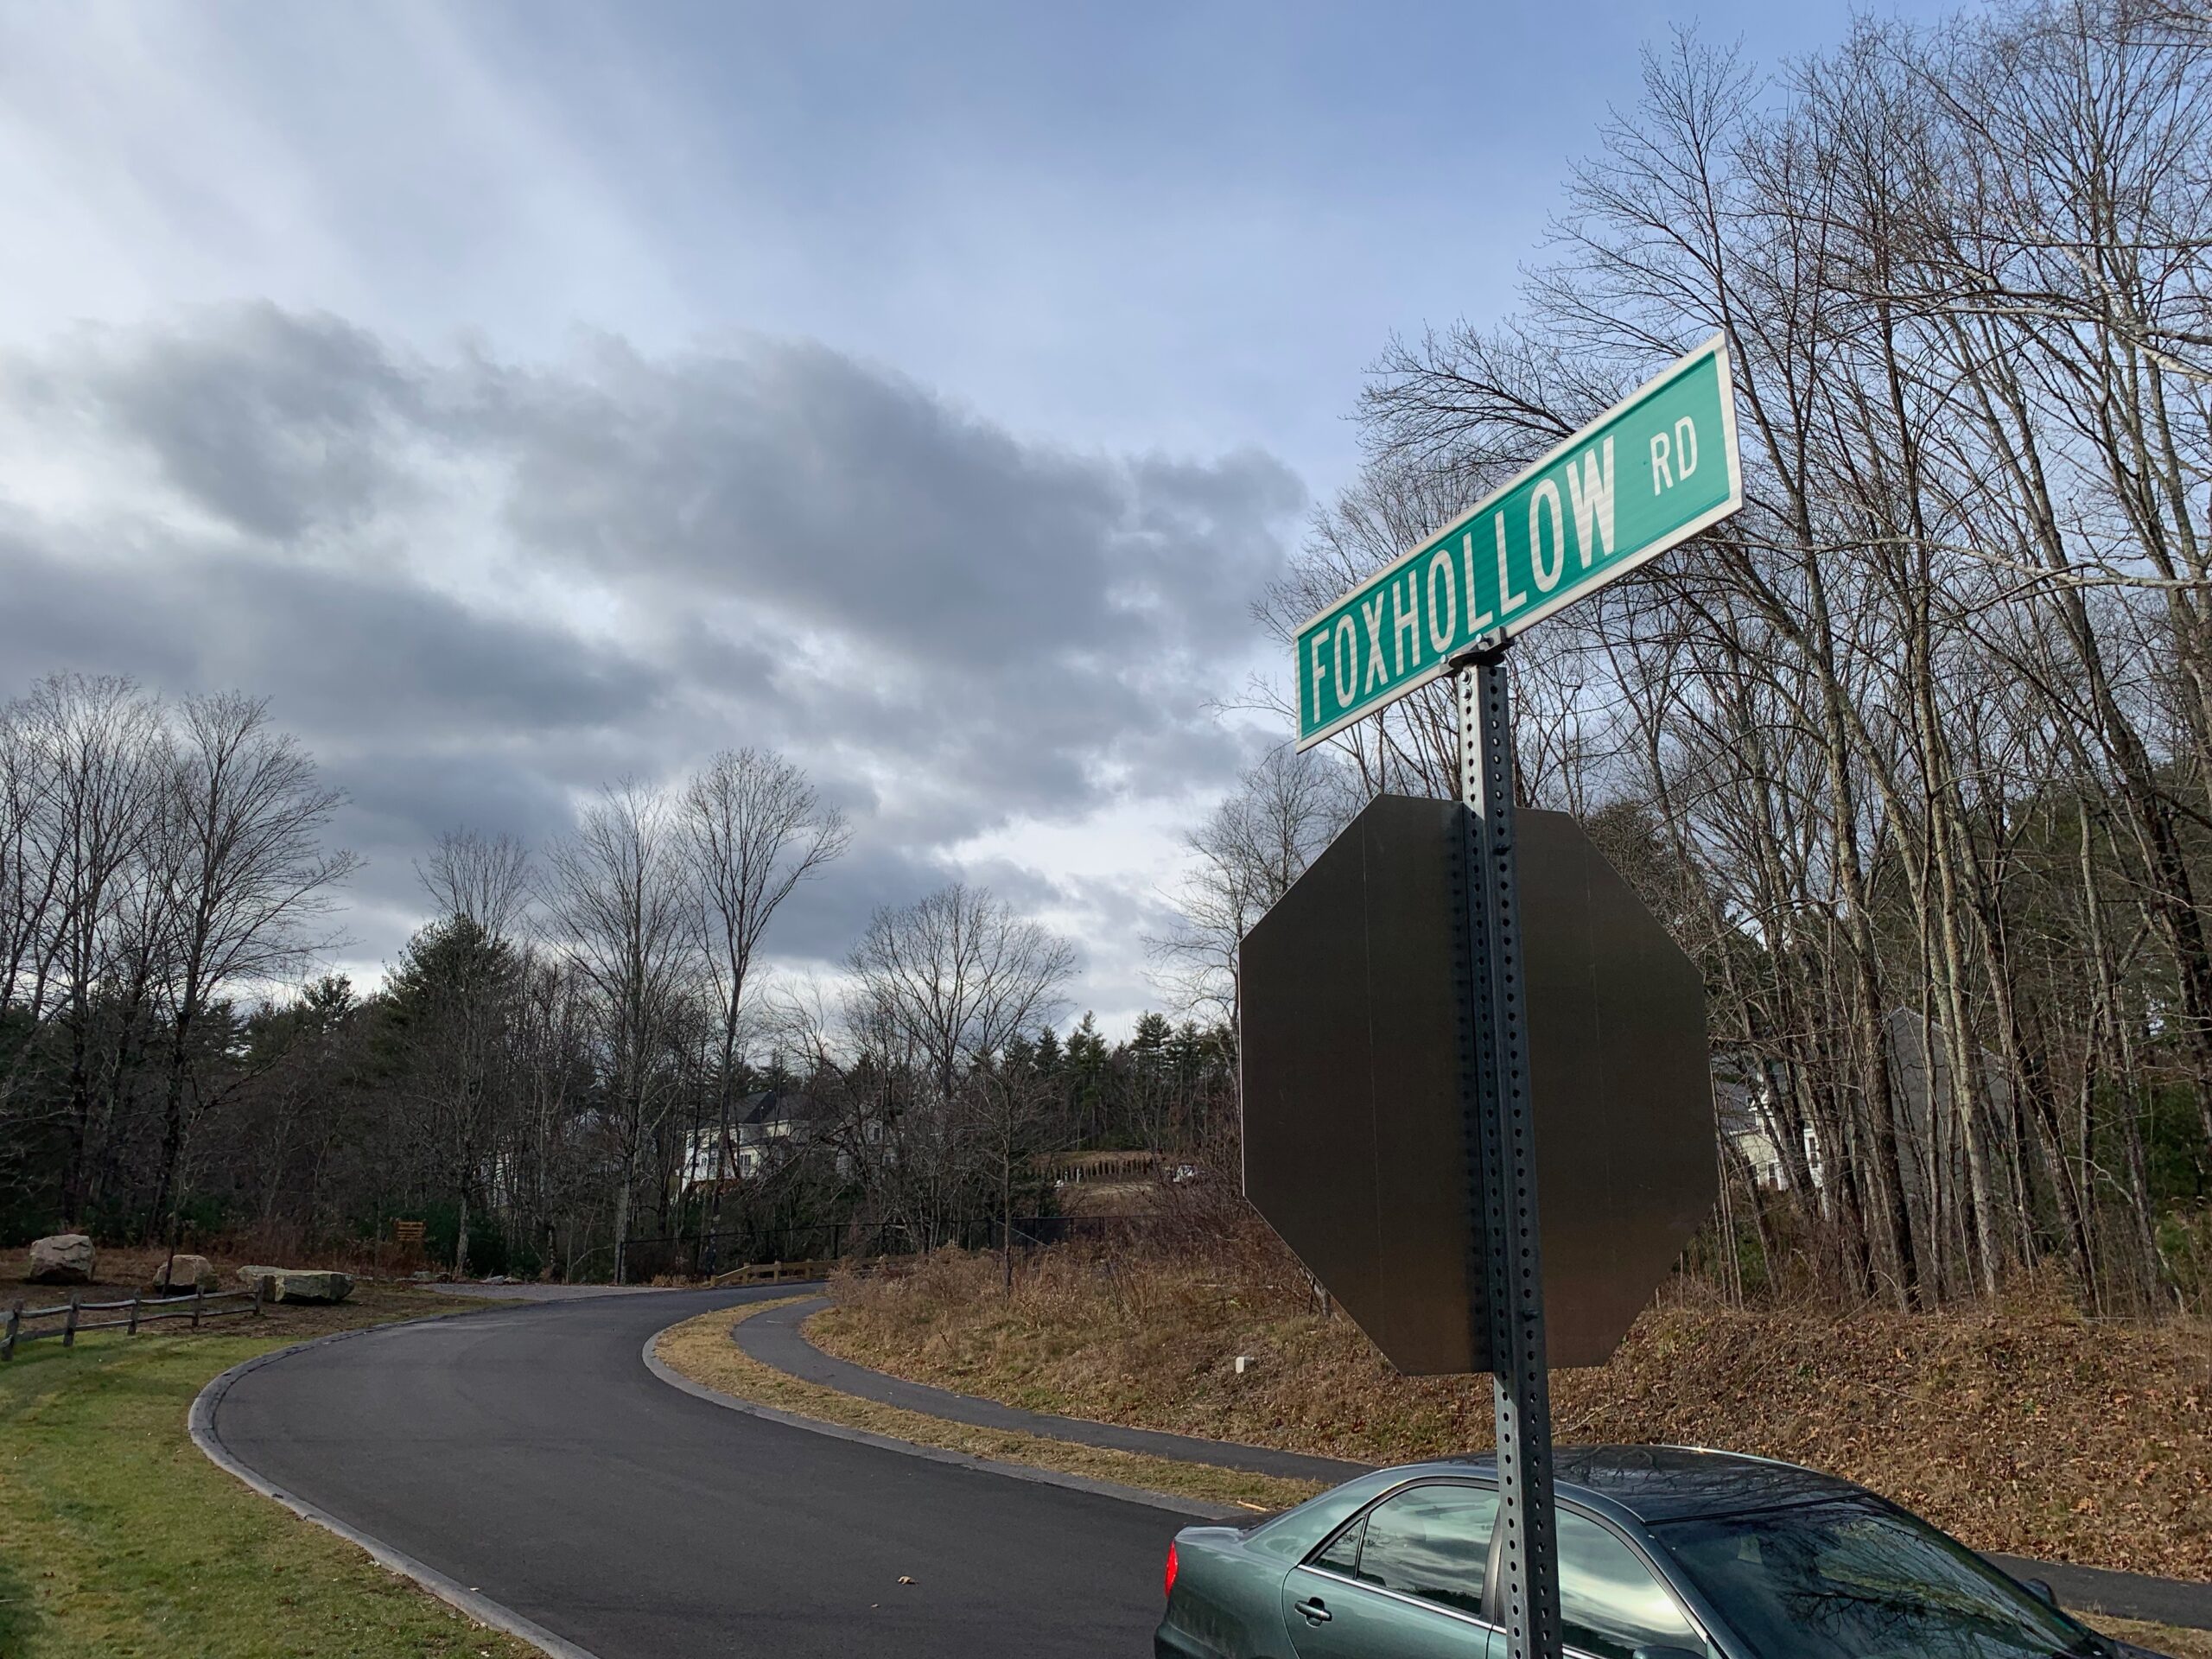 Planning Board votes to allow Foxhollow developer to eliminate stone wall